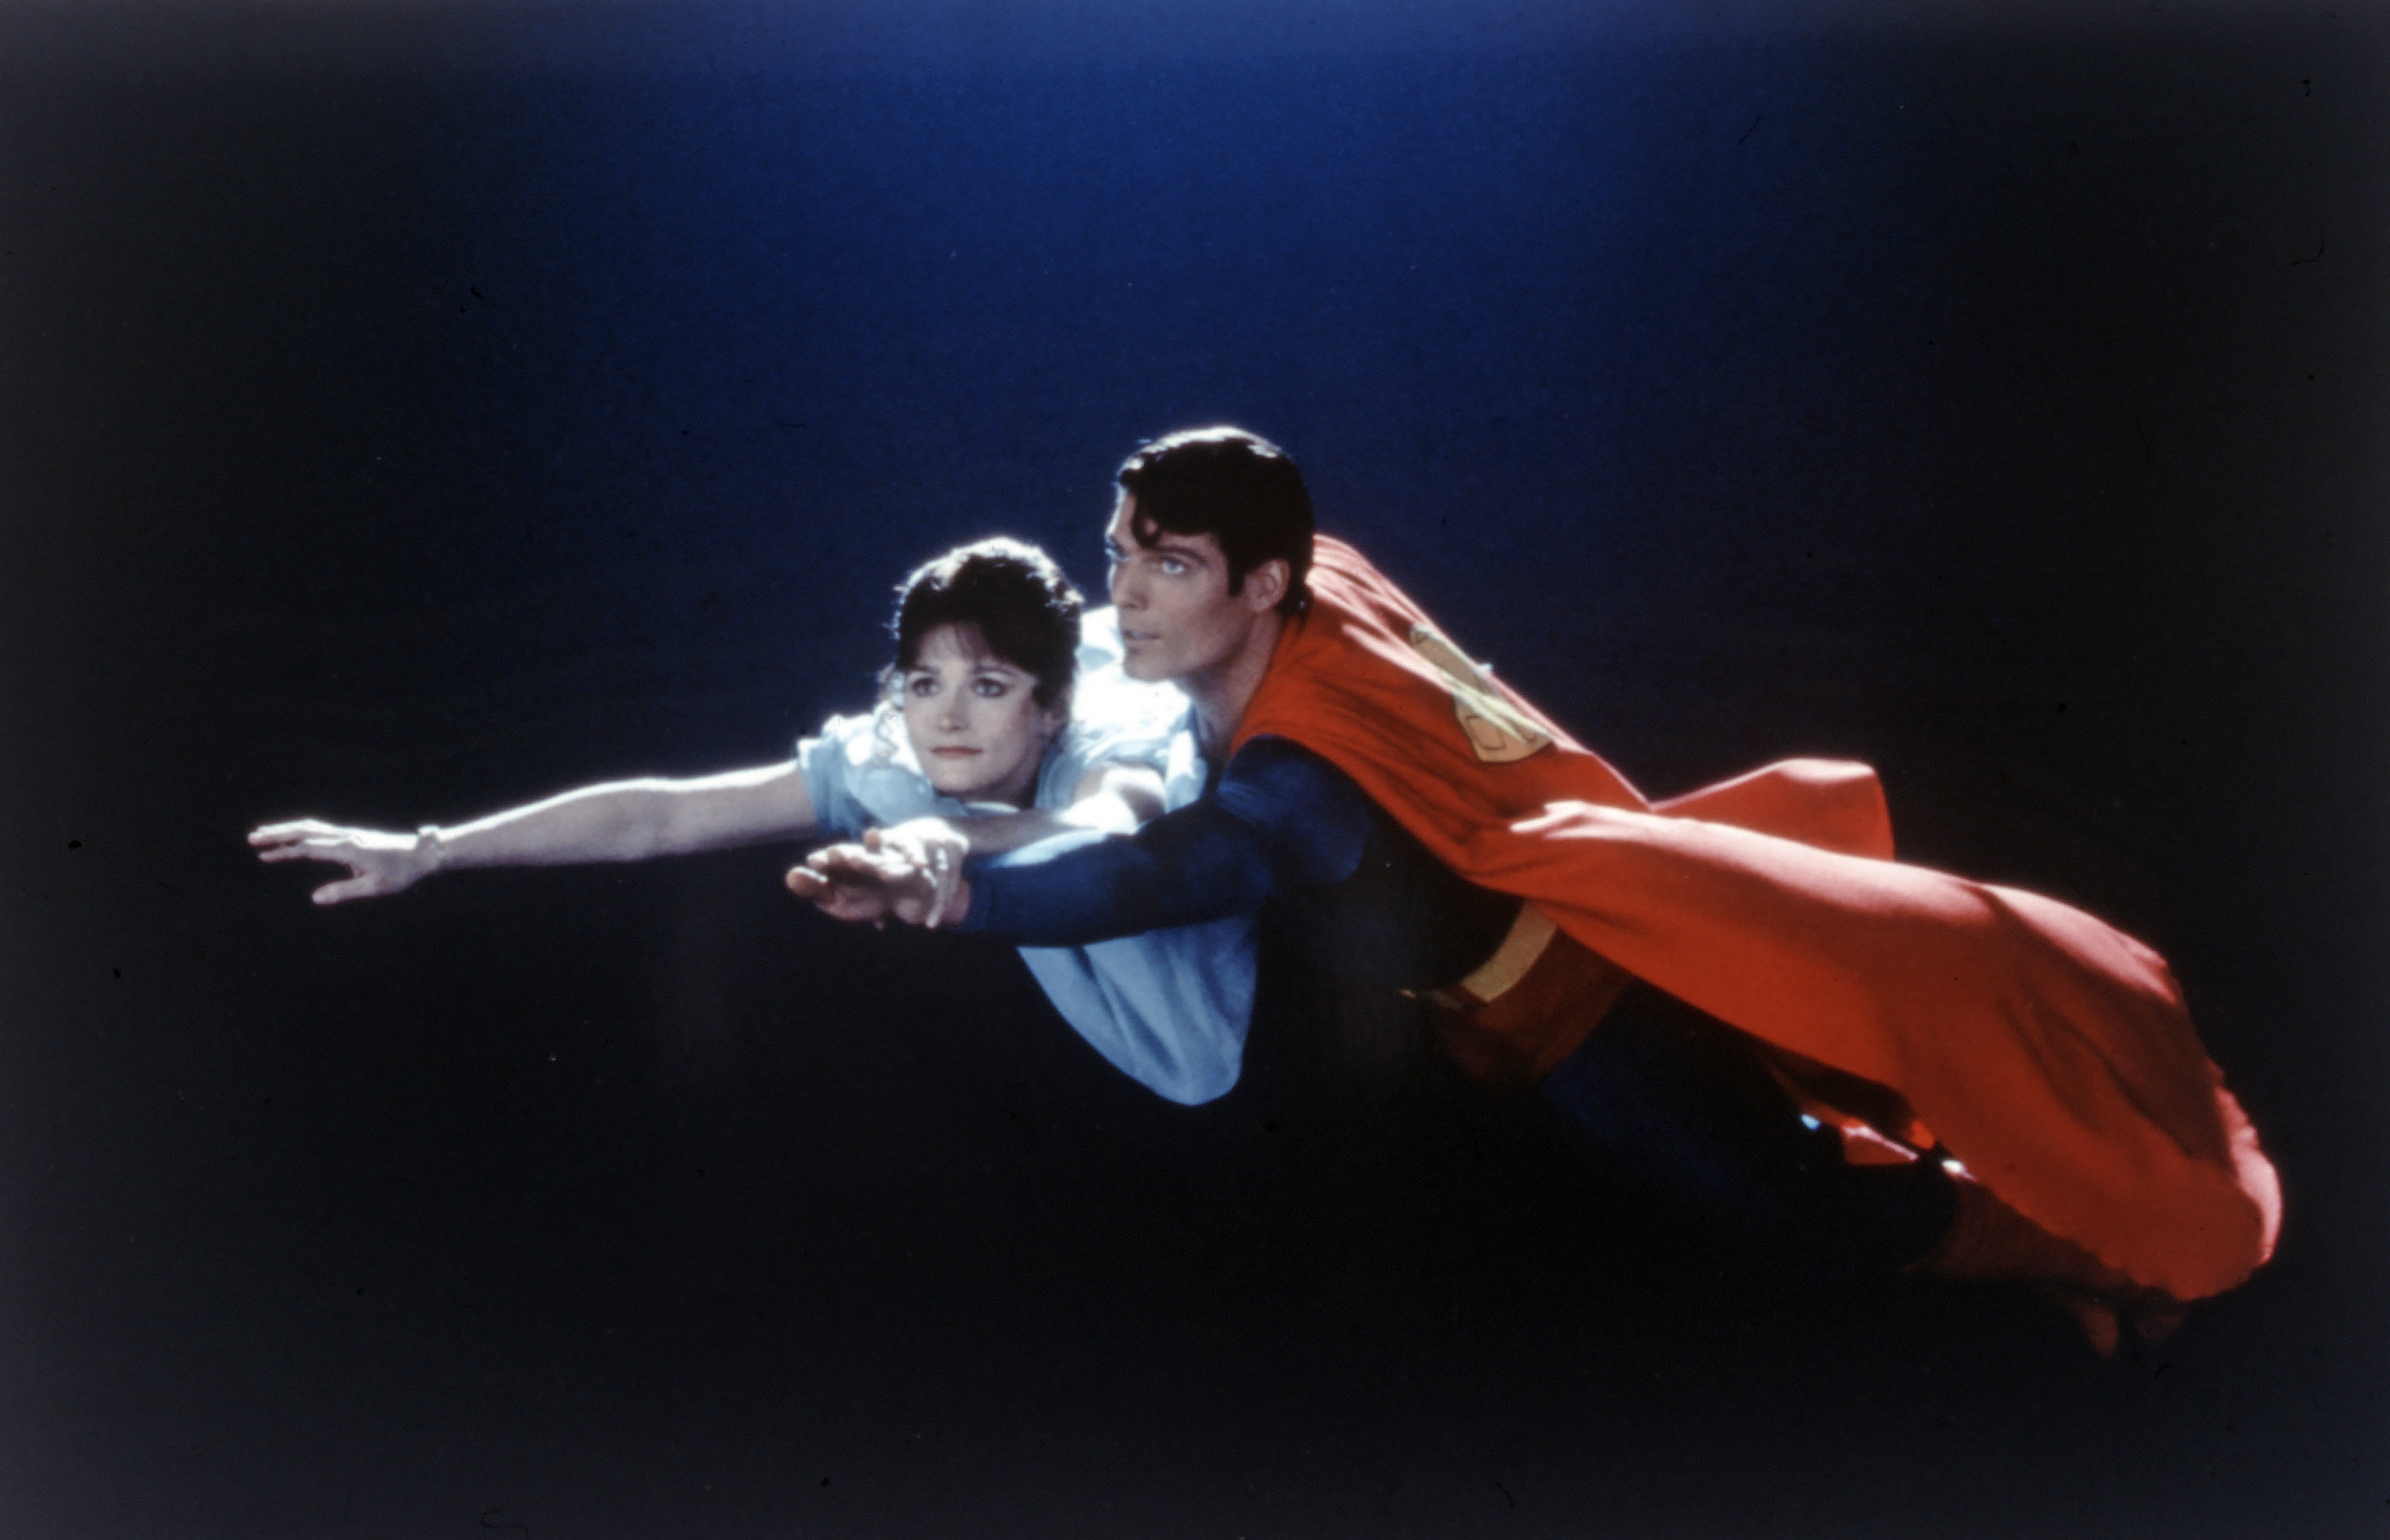 Lois Lane and Superman are flying over Metropolis in Superman (1978).